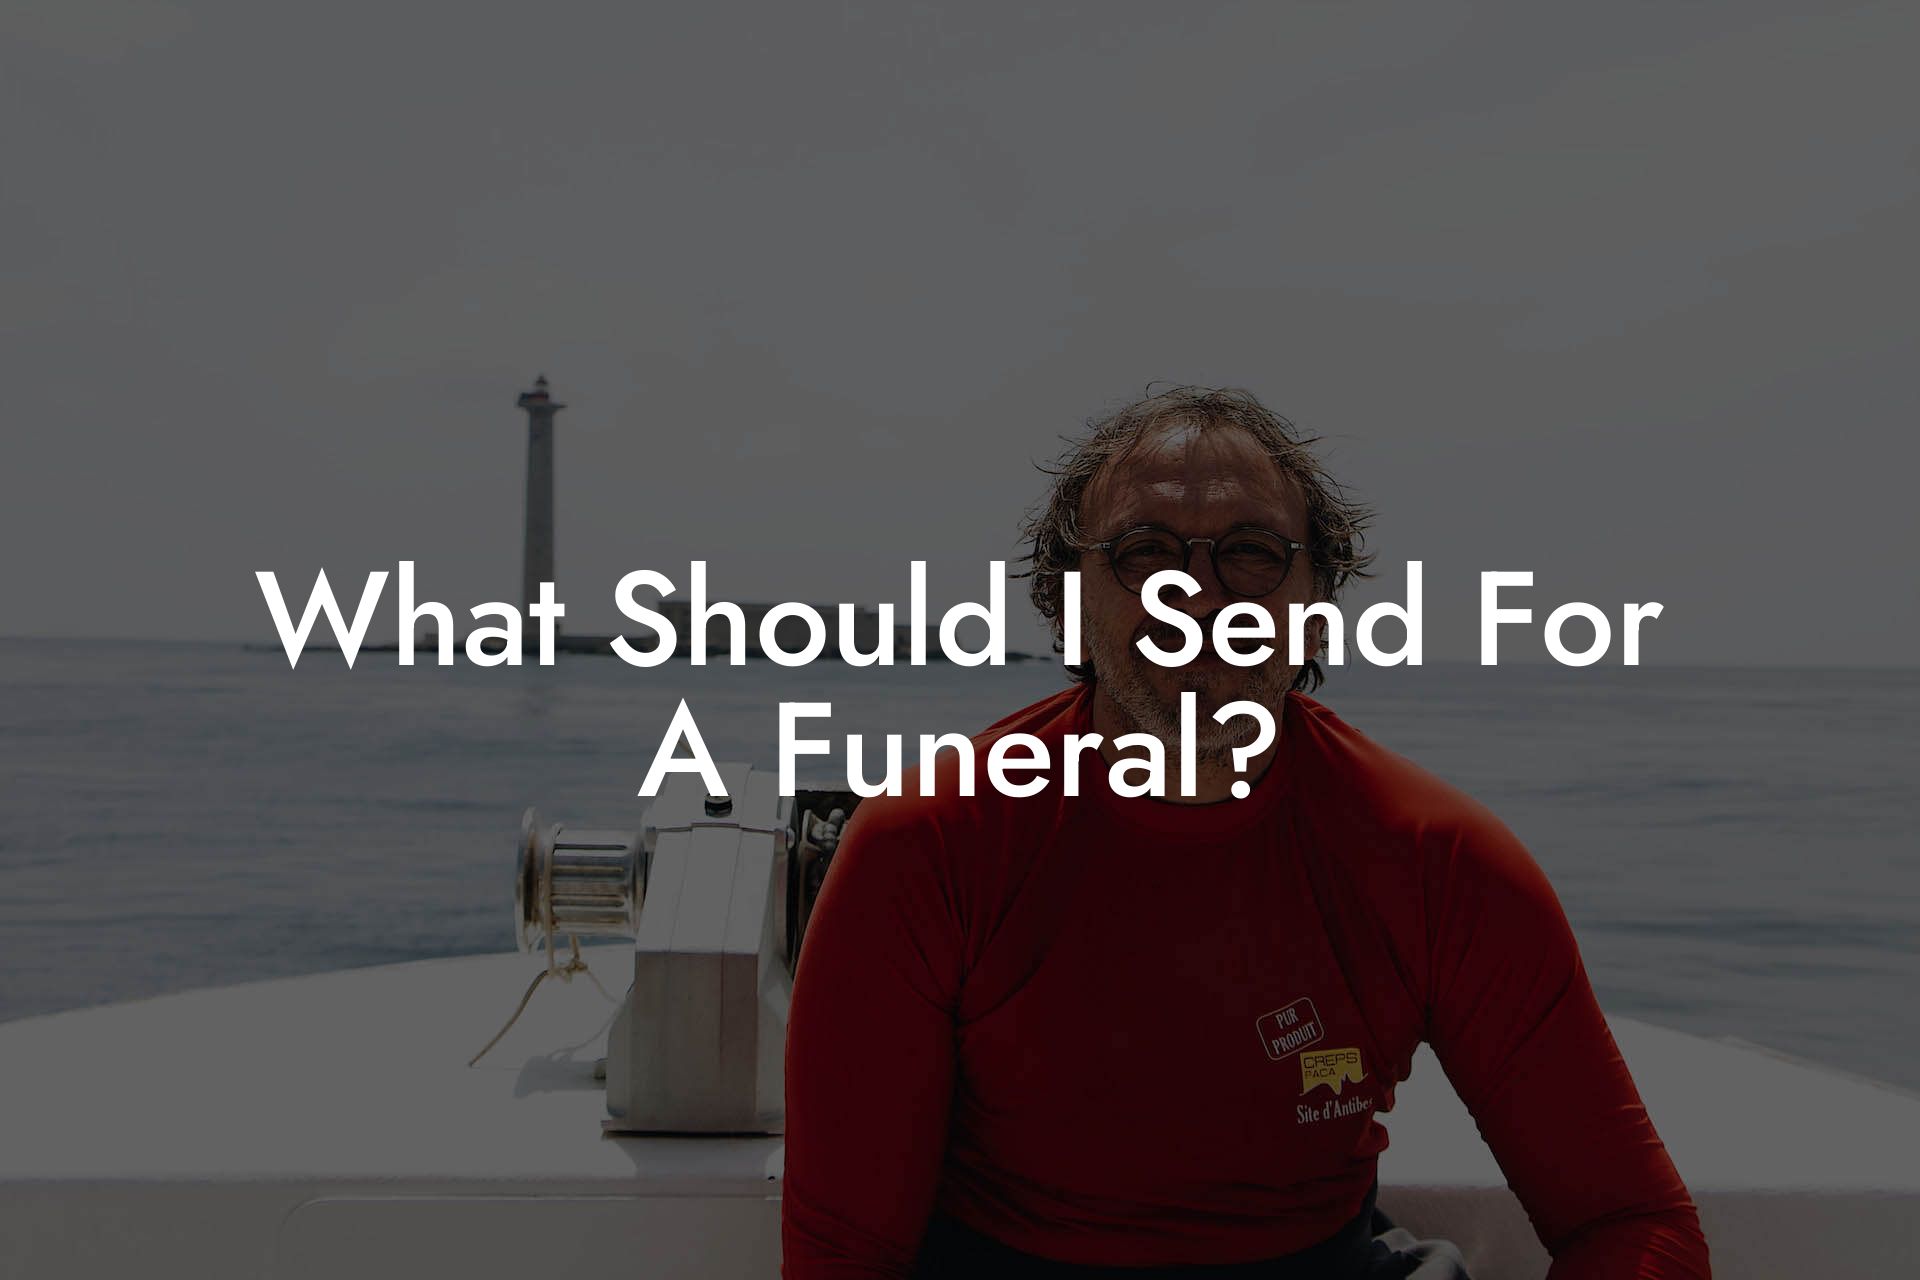 What Should I Send For A Funeral?